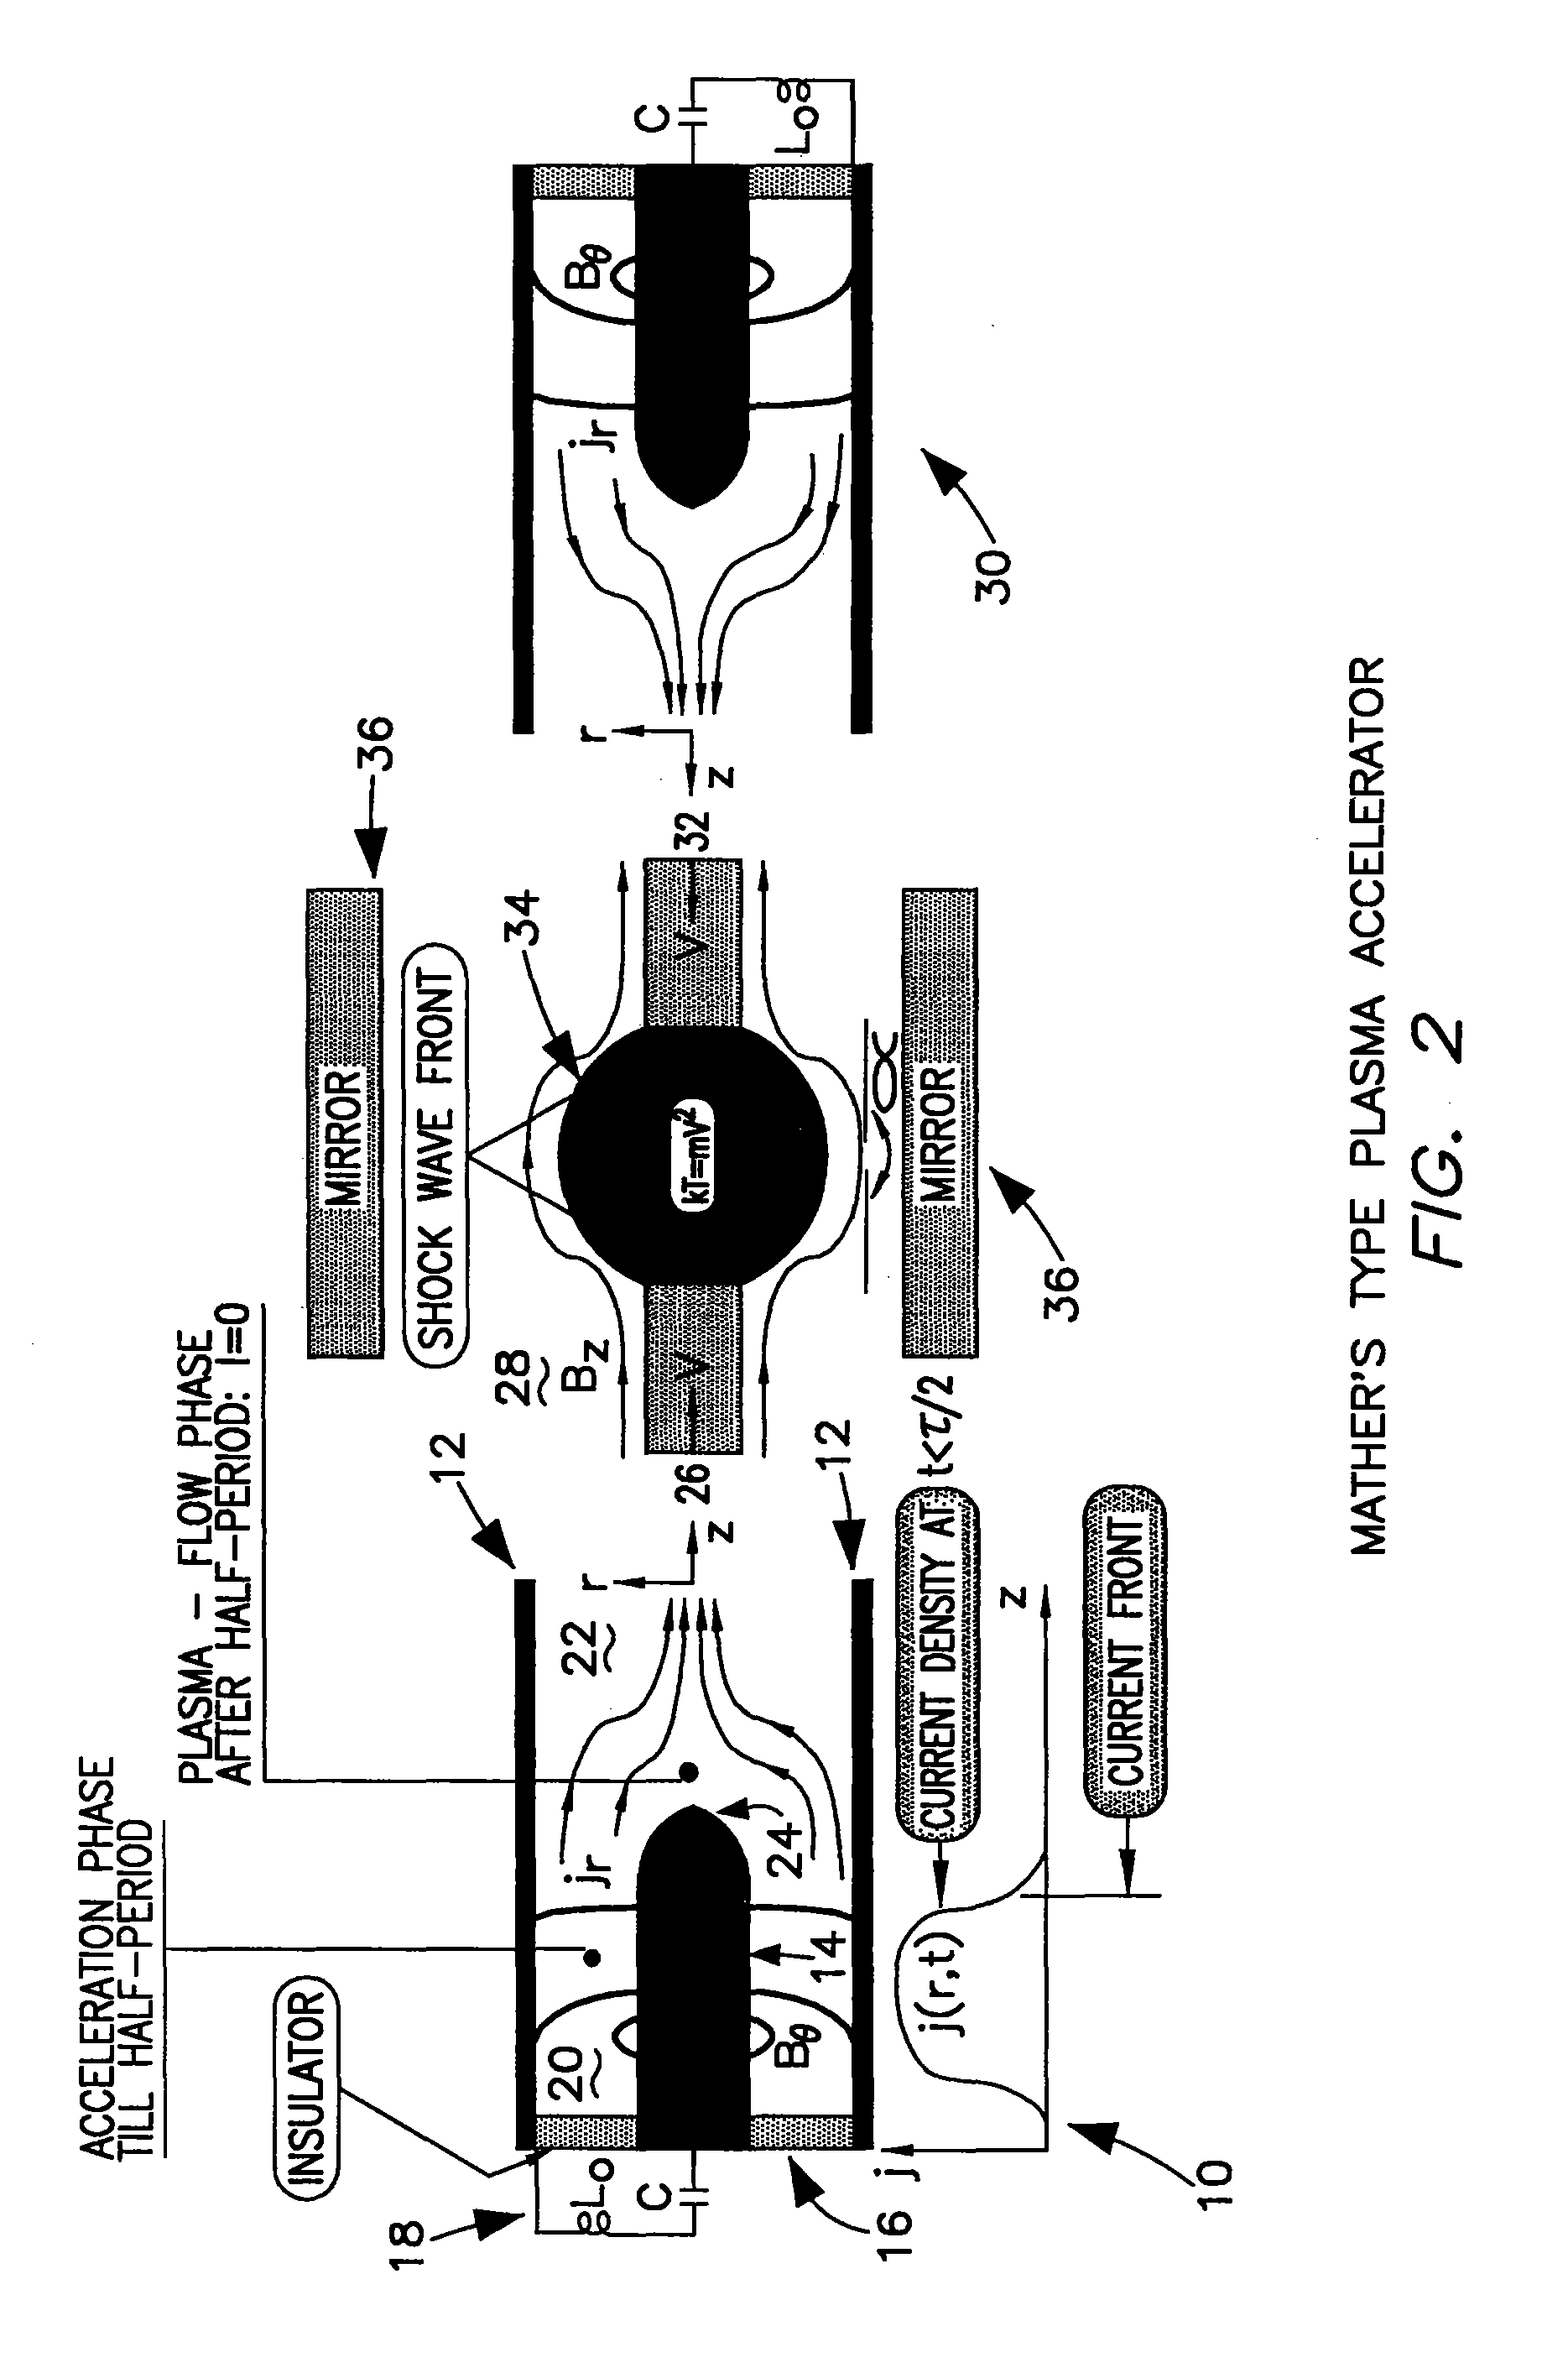 Method for generating extreme ultraviolet with mather-type plasma accelerators for use in Extreme Ultraviolet Lithography